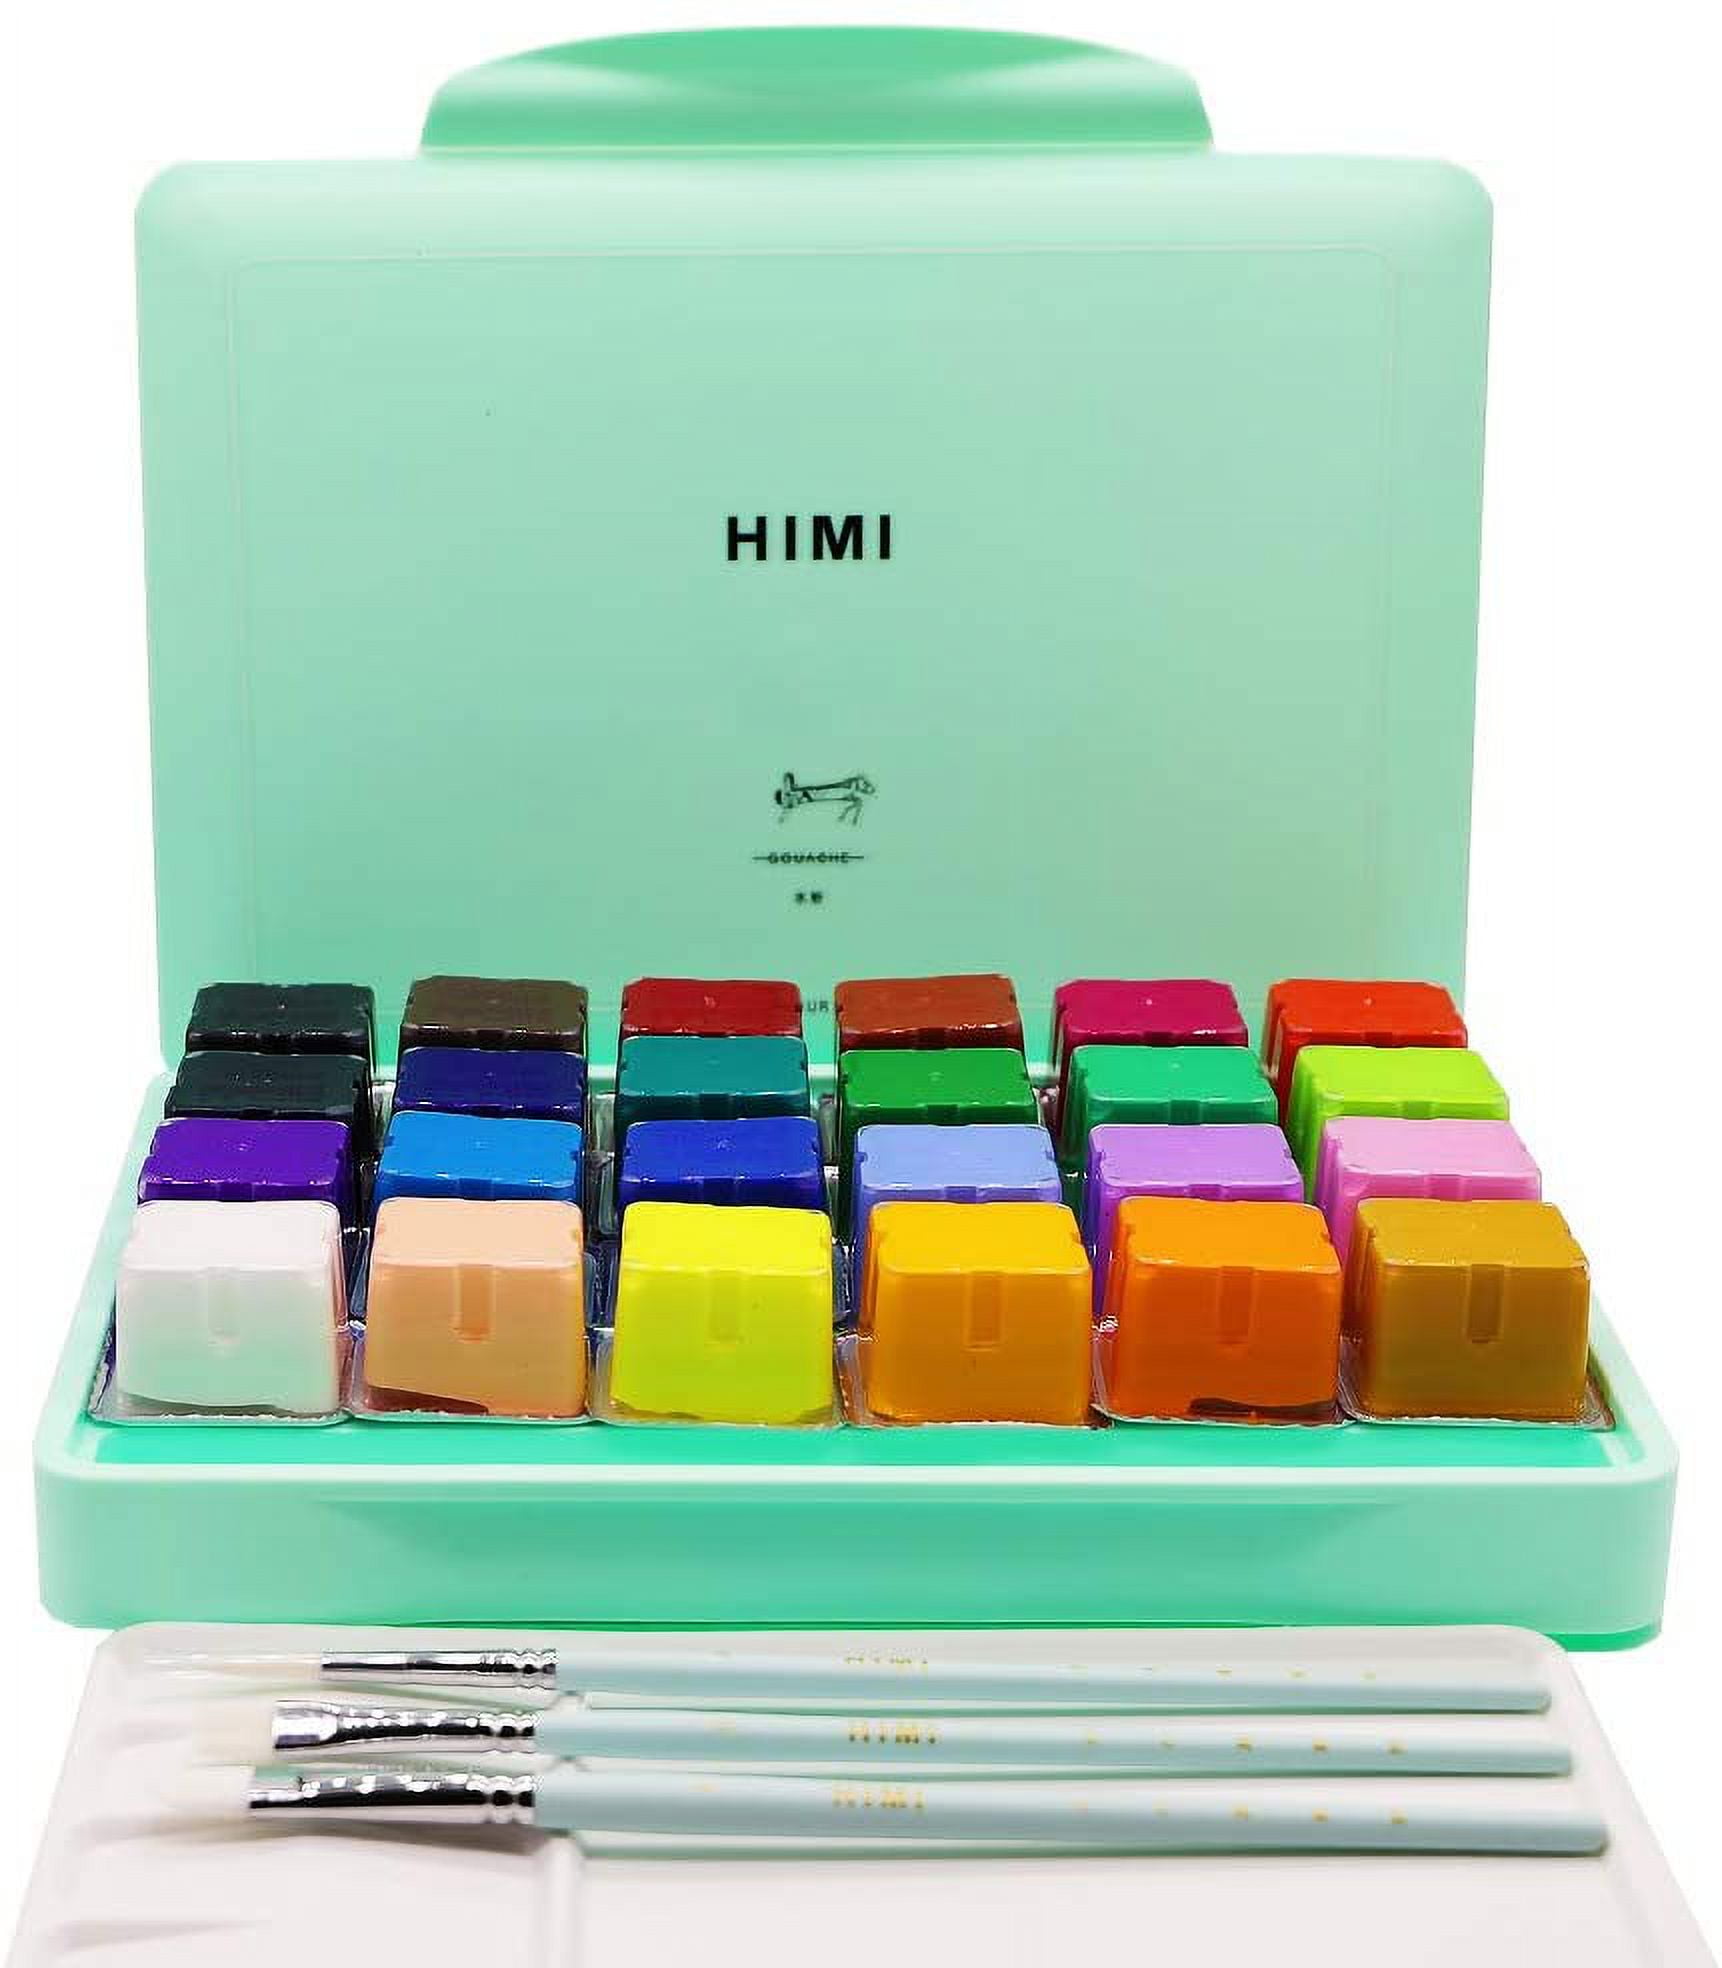 ABEIER Himi Gouache Paint Set, 24 Colors x 30ml Unique Jelly Cup Design with 3 Paint Brushes in A Carrying Case Perfect for Artists, St